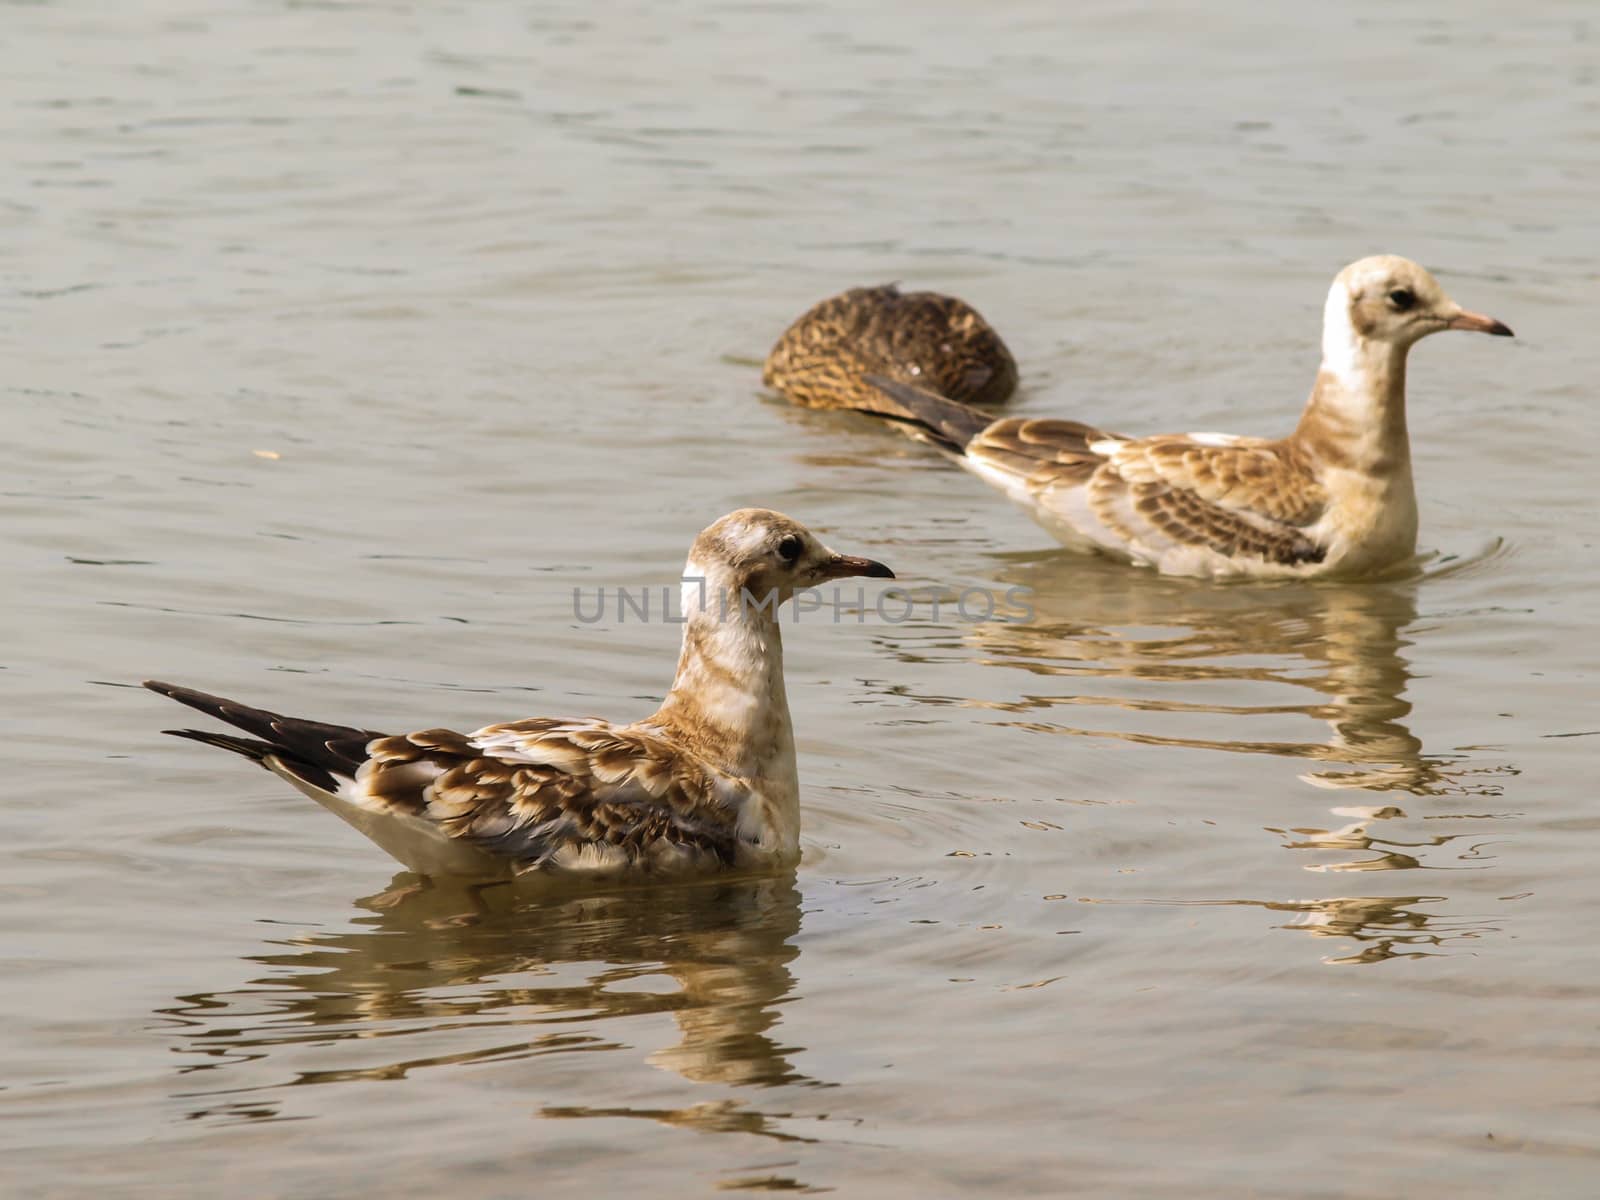 Young dotted seagulls in water with reflections